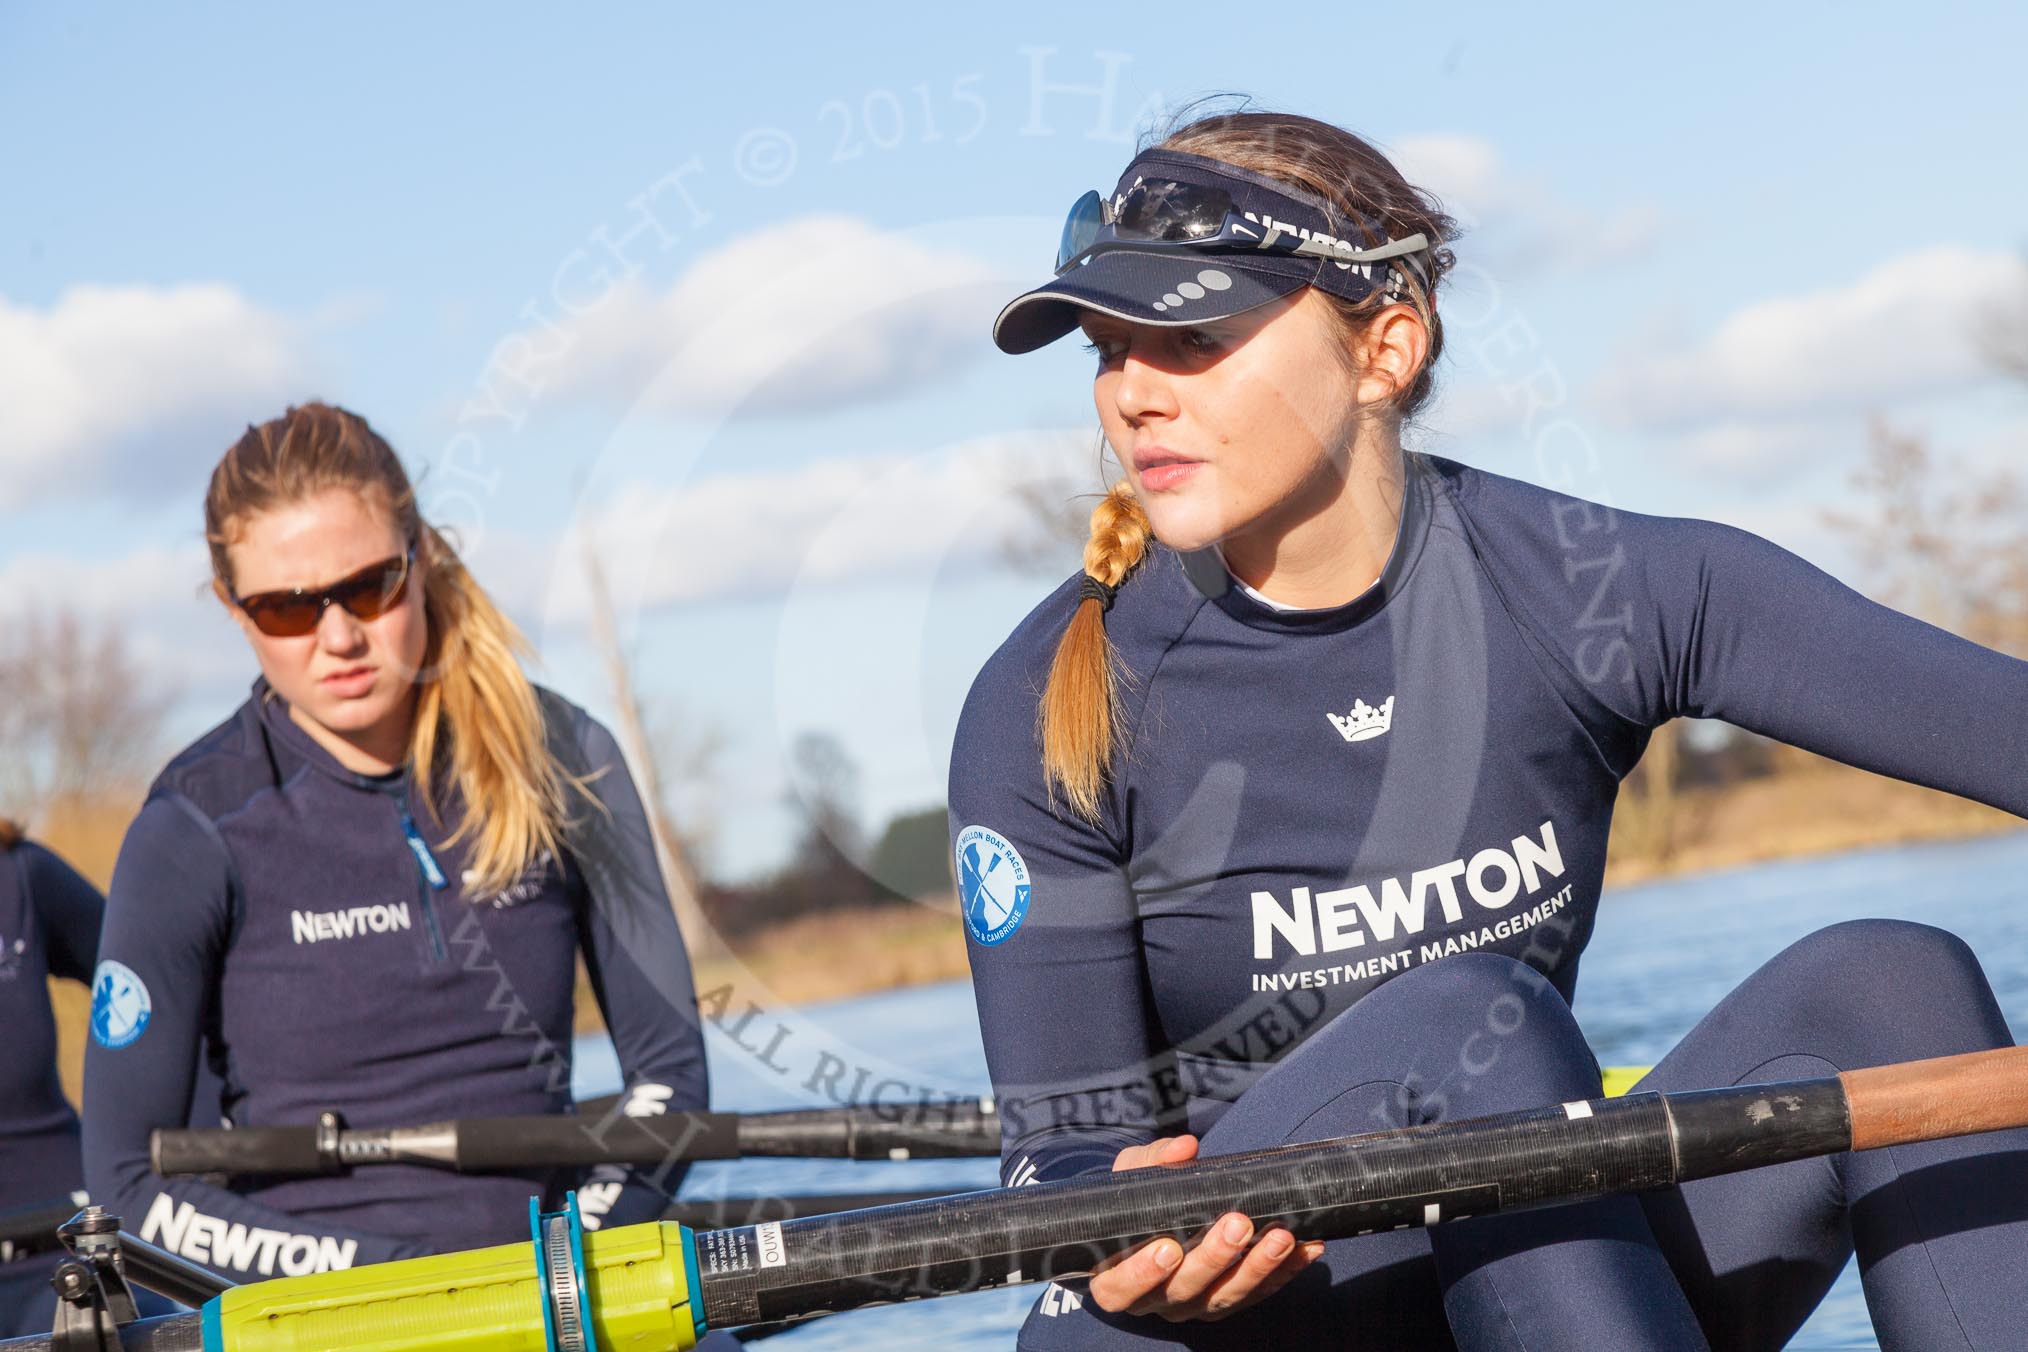 The Boat Race season 2015: OUWBC training Wallingford.

Wallingford,

United Kingdom,
on 04 March 2015 at 15:28, image #22